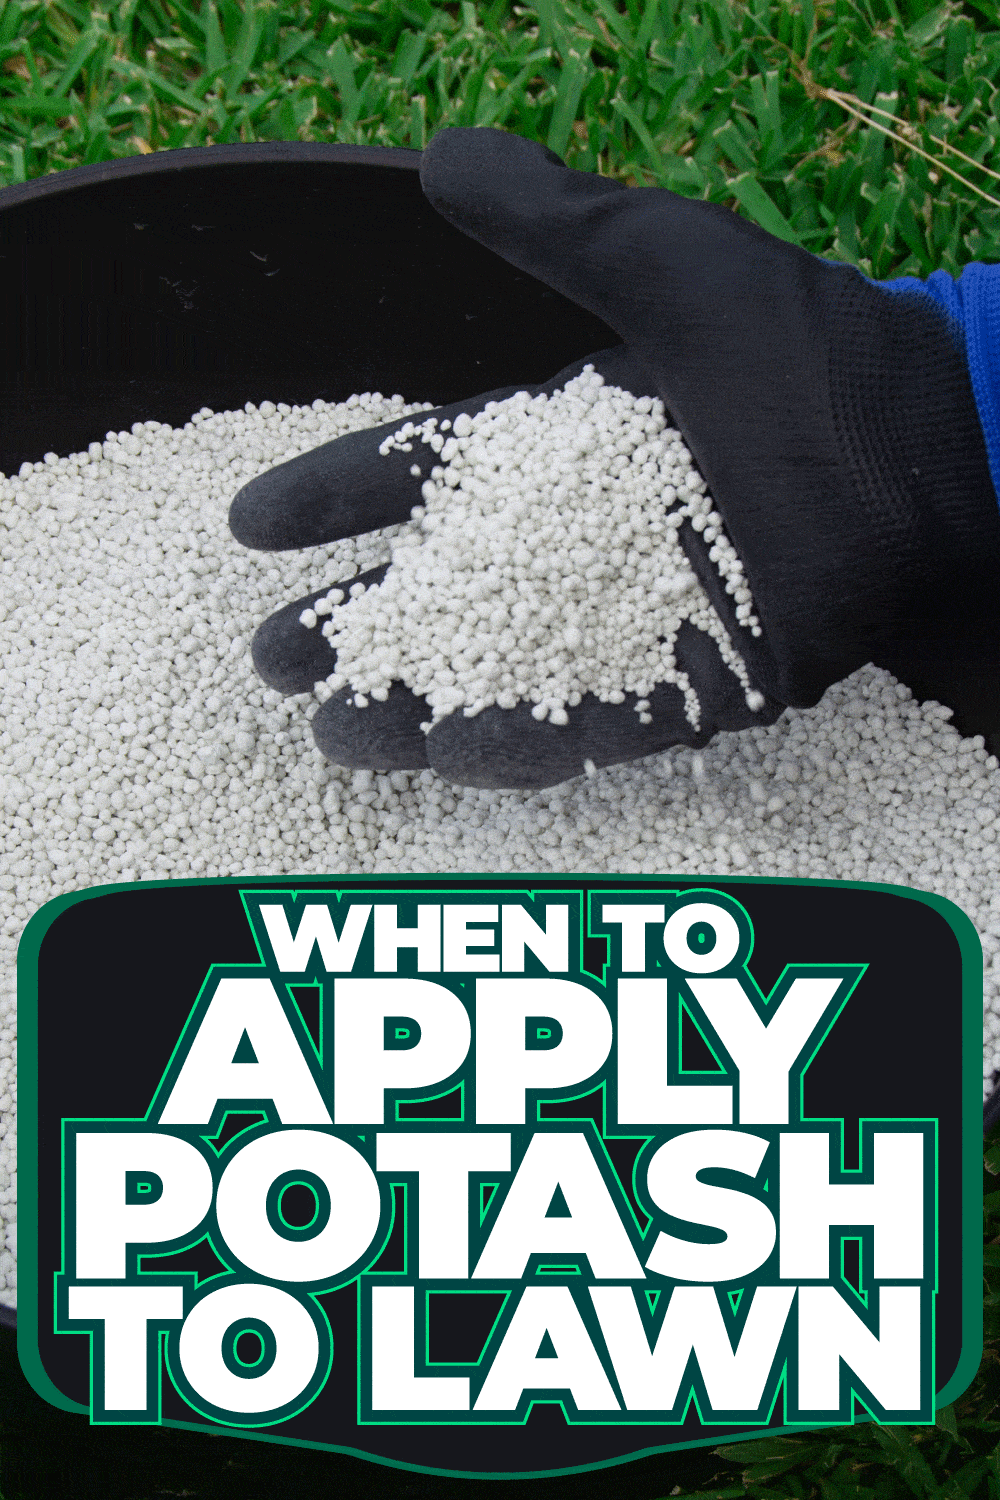 When To Apply Potash To Lawn [And How To]